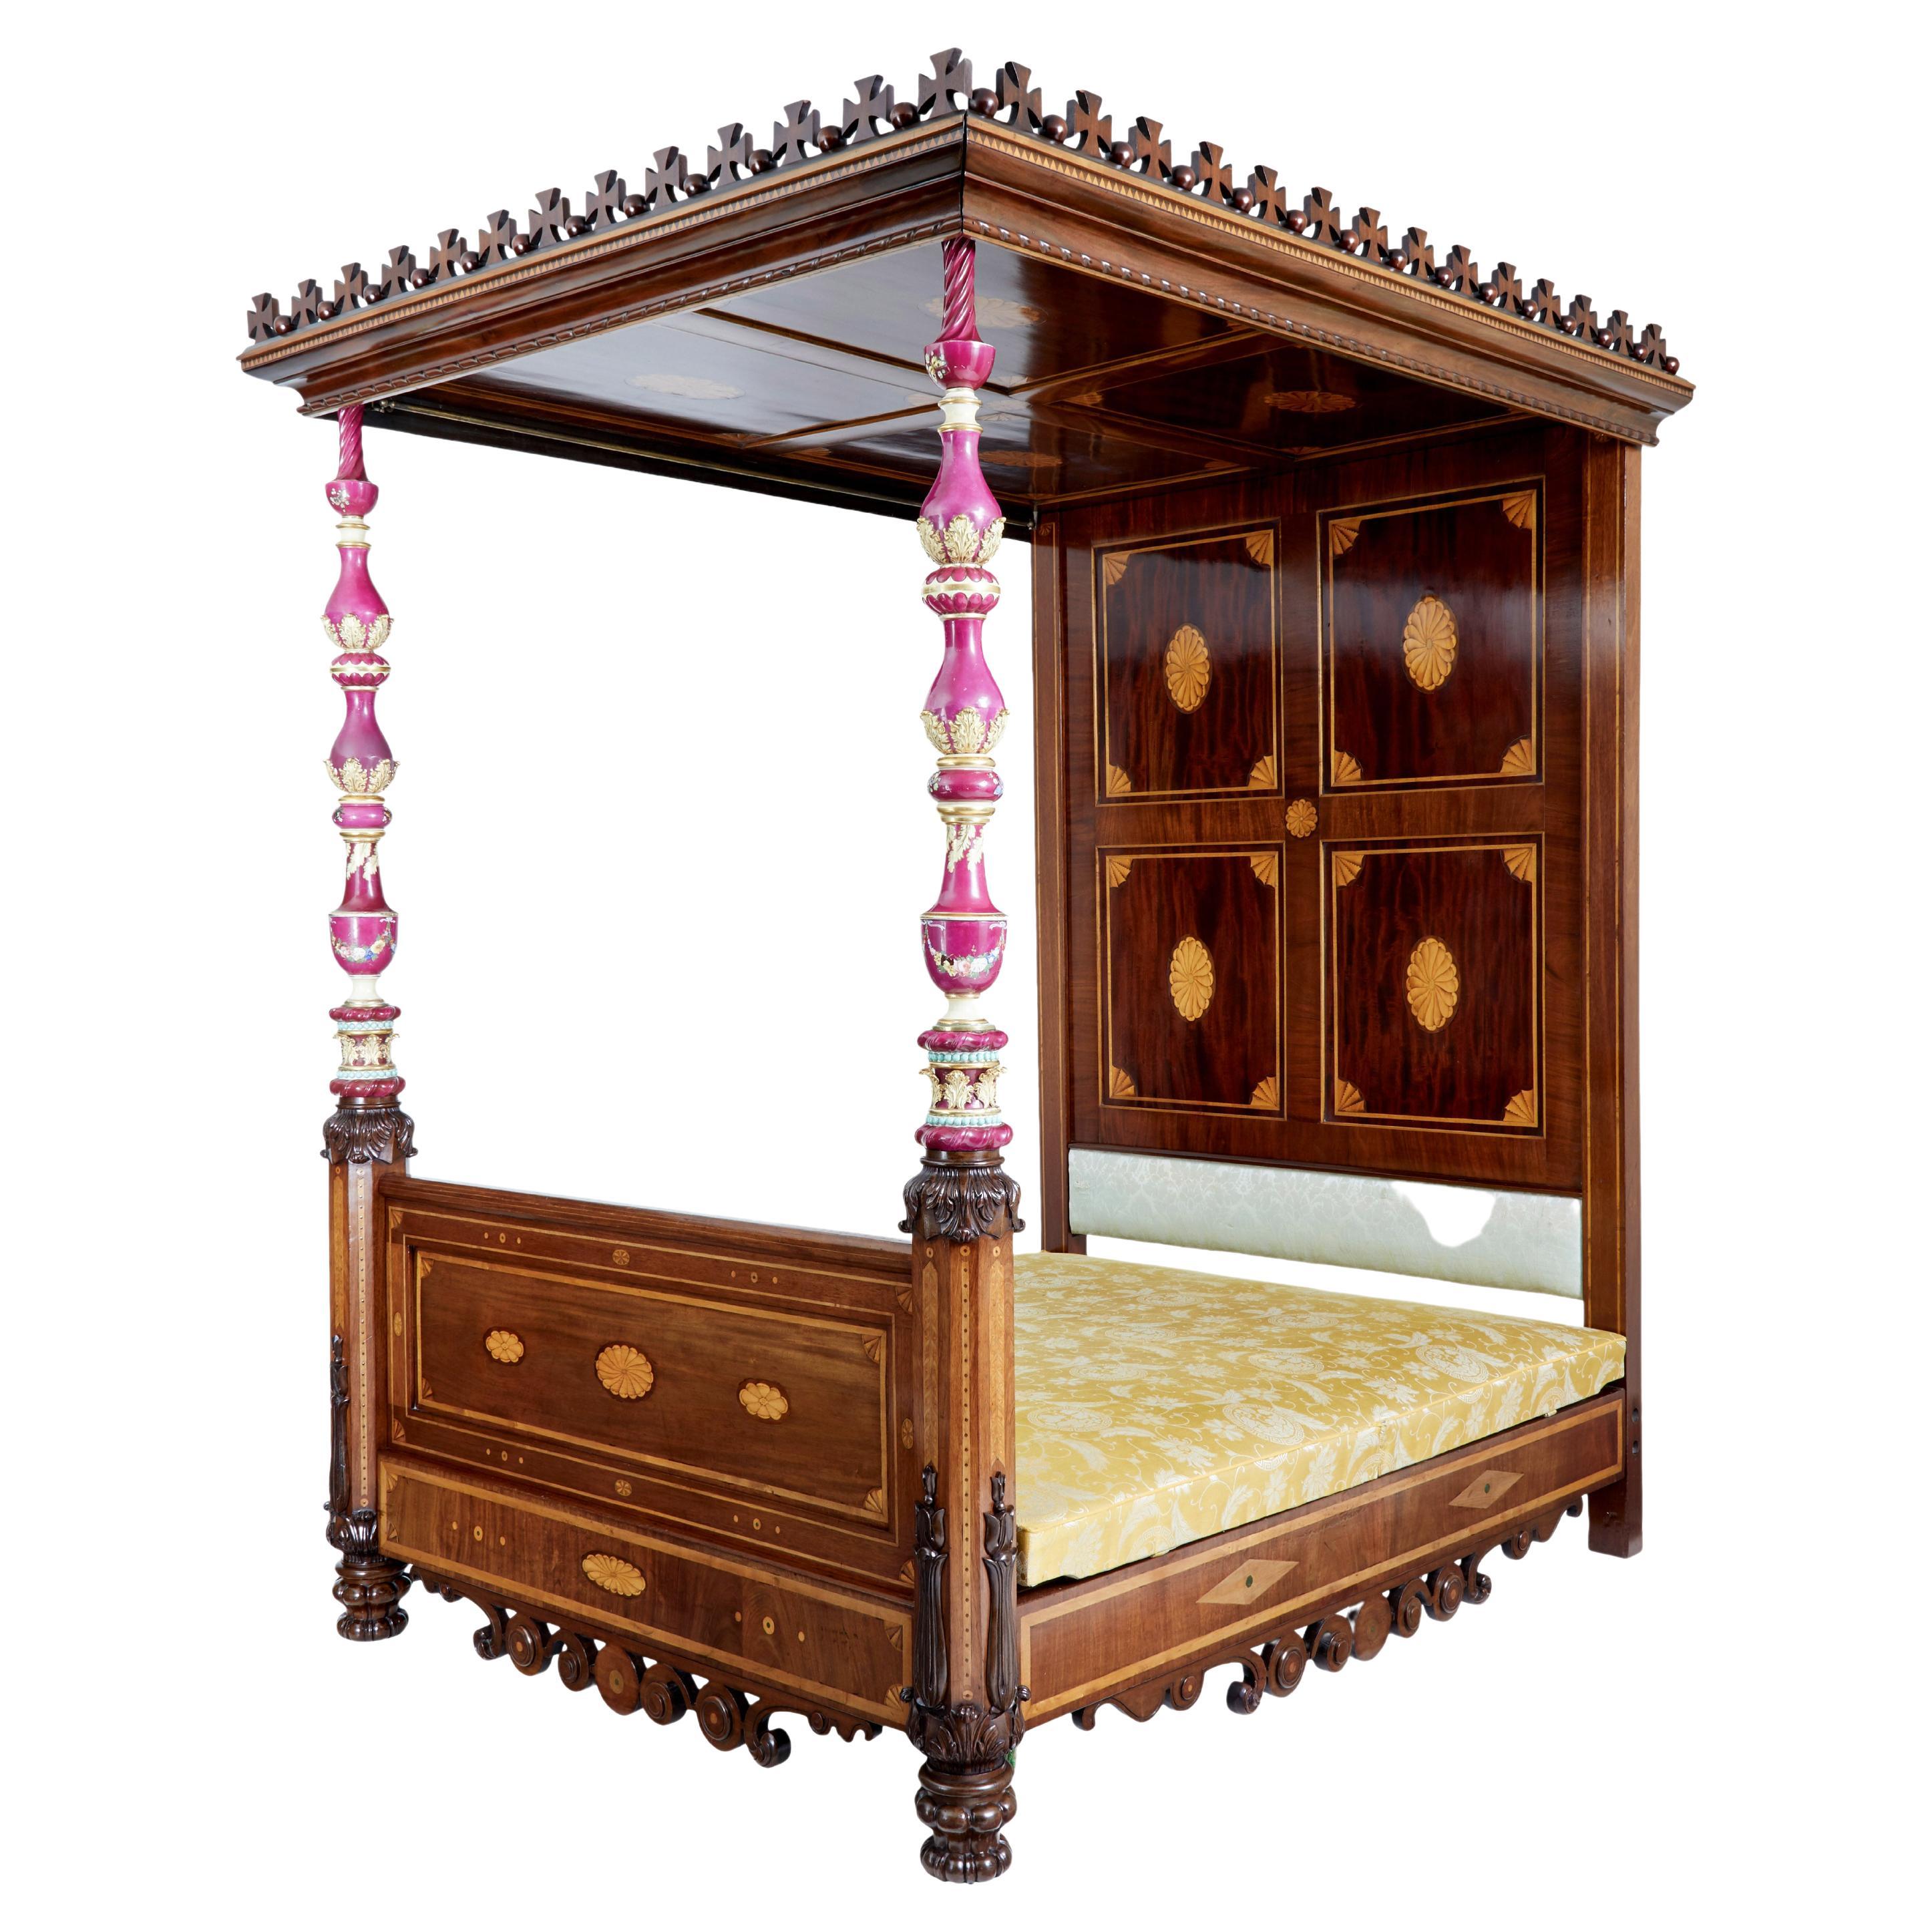 Rare 19th Century Mahogany and Porcelain 4 Poster Bed For Sale